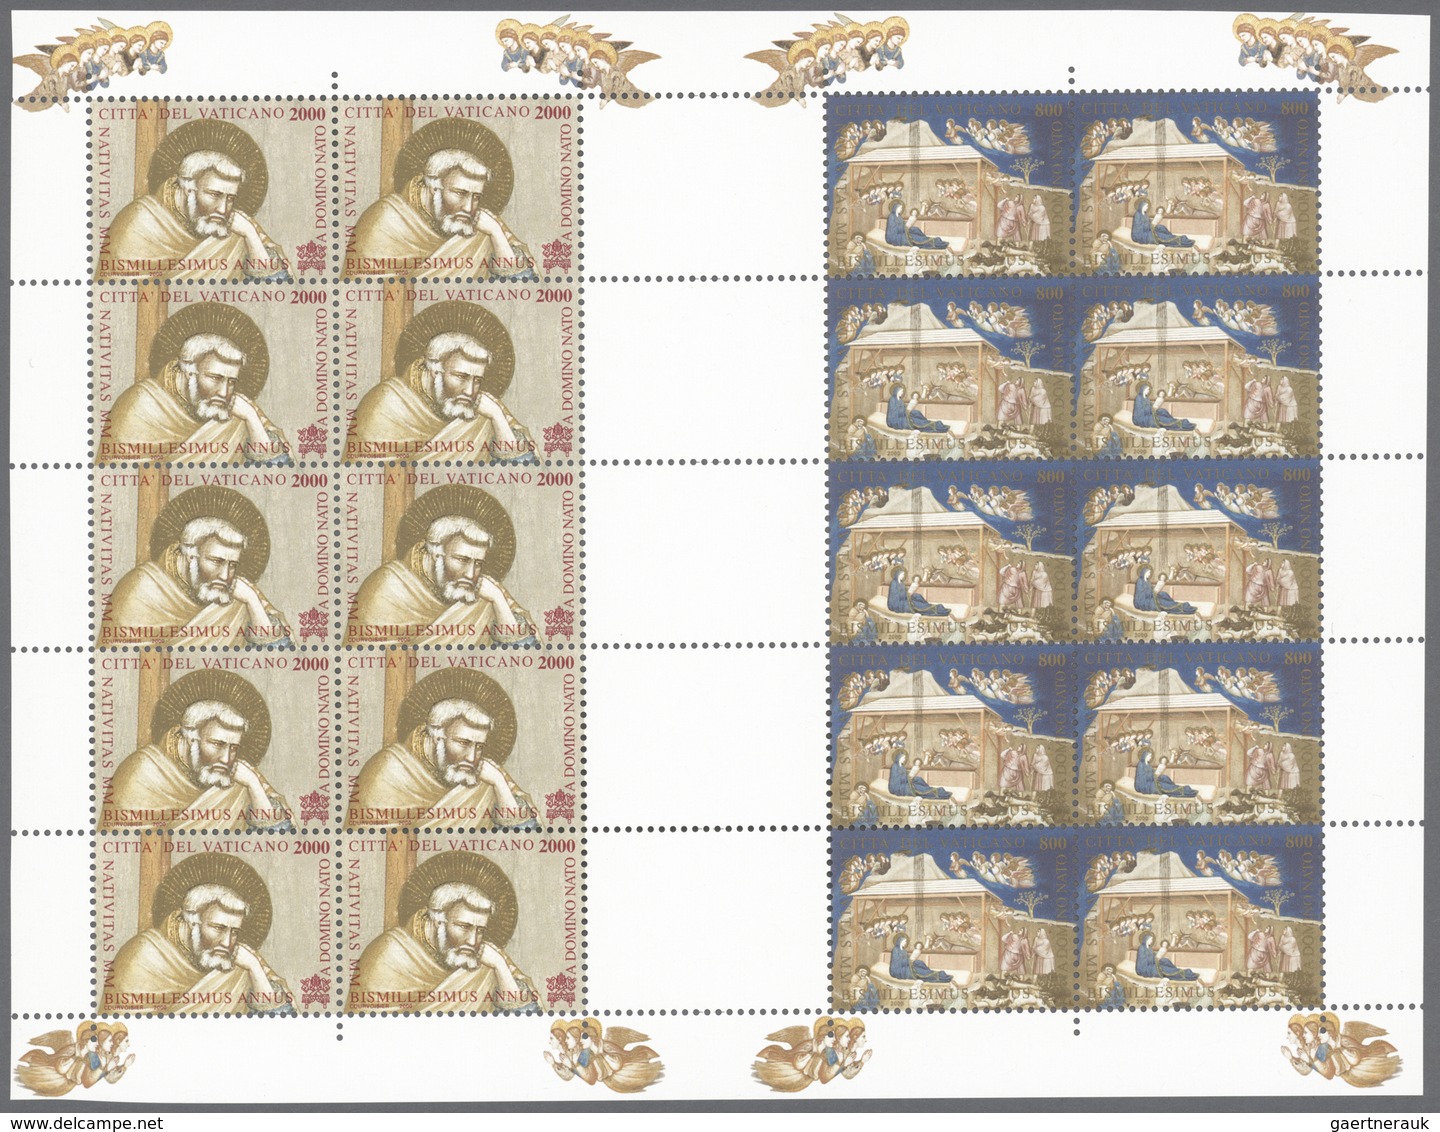 Vatikan: 2000, Christmas, 1200 L + 1500 L And 2000 L + 800 L, Two Undivided Pairs Of Miniature Sheet - Unused Stamps